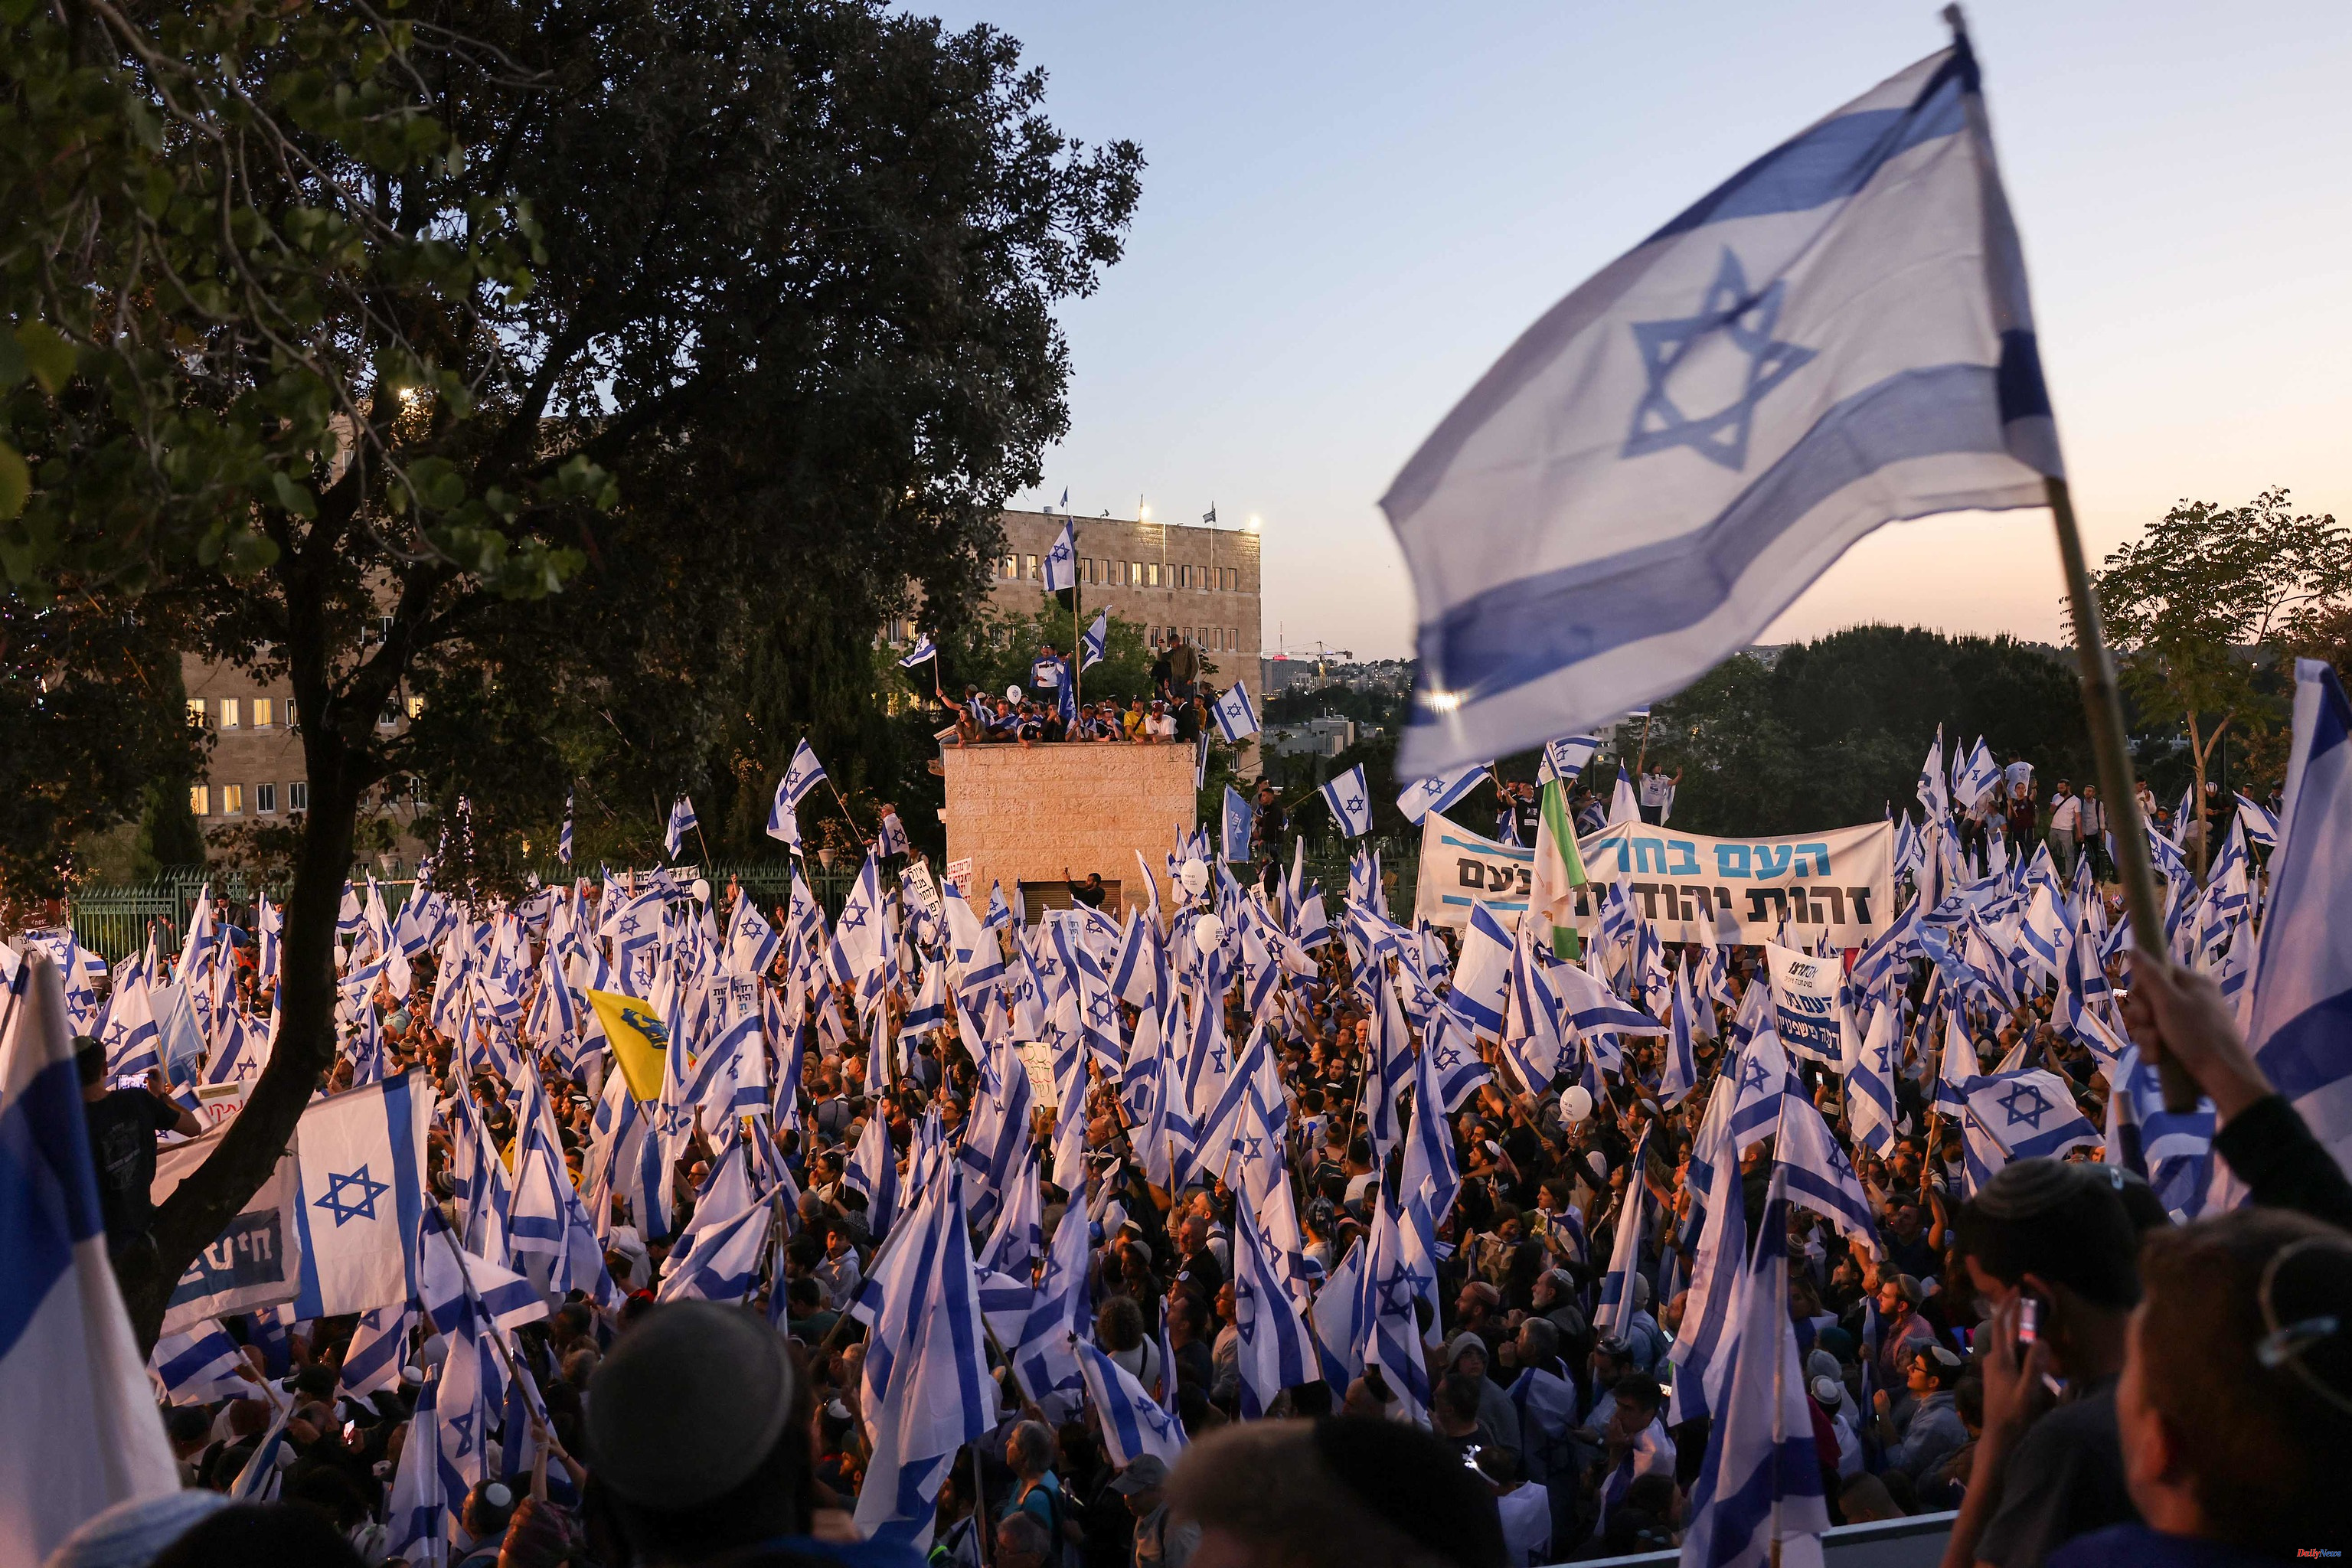 Middle East Massive right-wing demonstration in favor of judicial reform in Israel